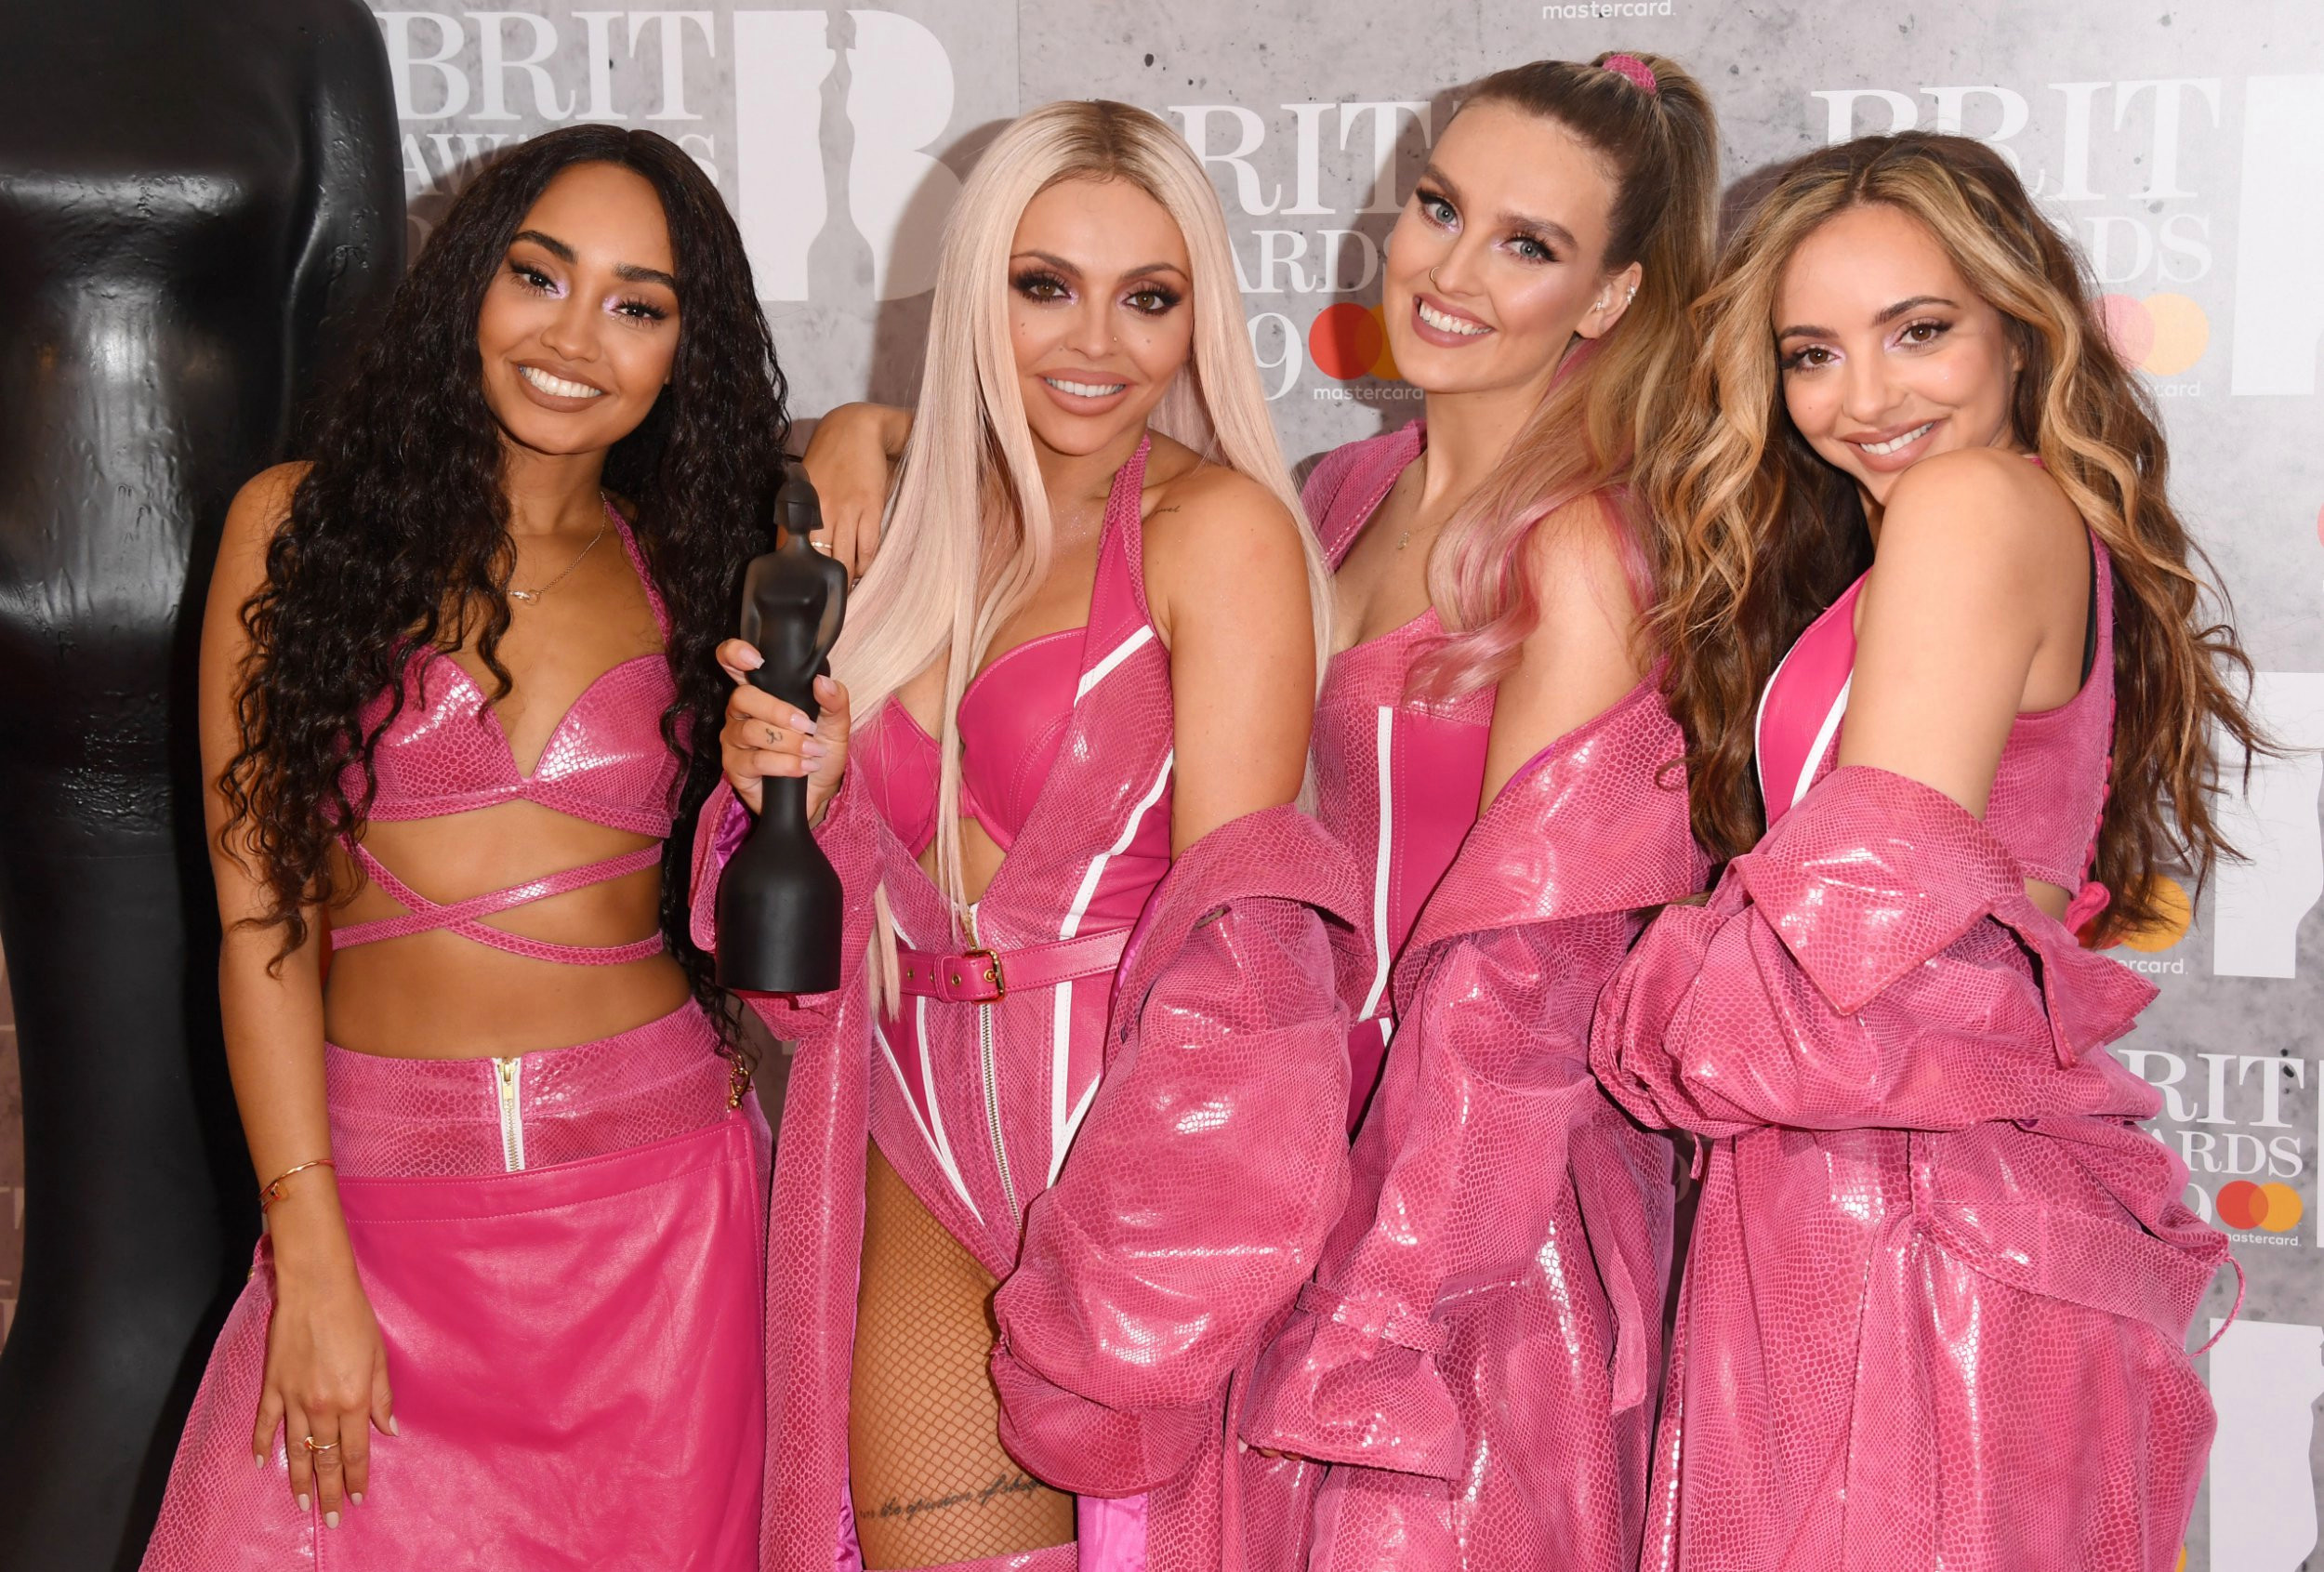 Little Mix land first Brit nomination as a trio after Jesy Nelson leaves the group